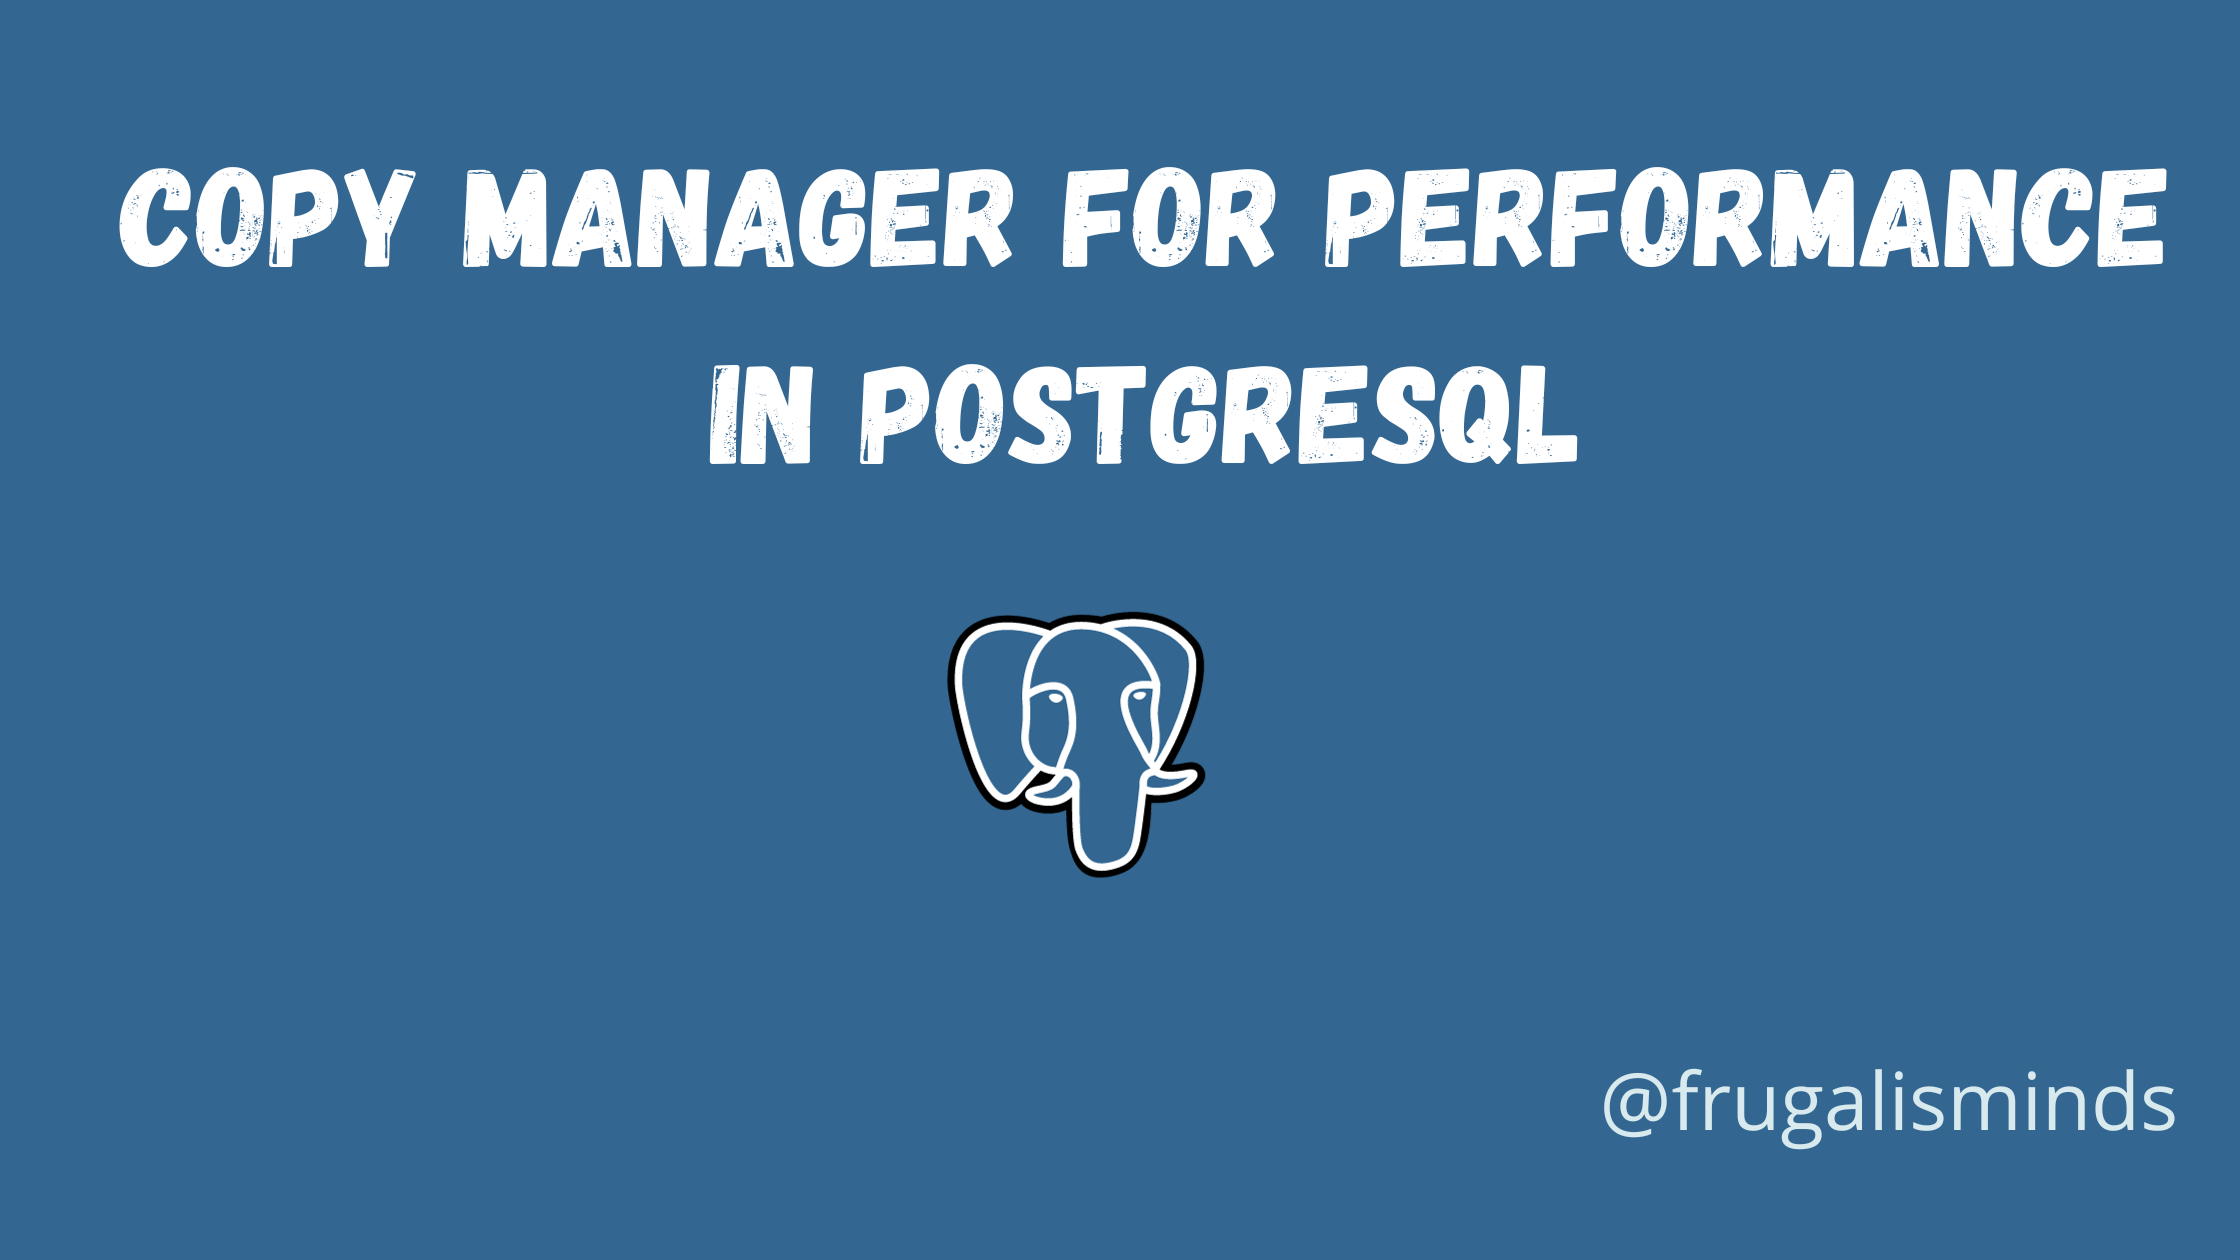 handle large data sizes in PostgreSQL with COPY MANAGER